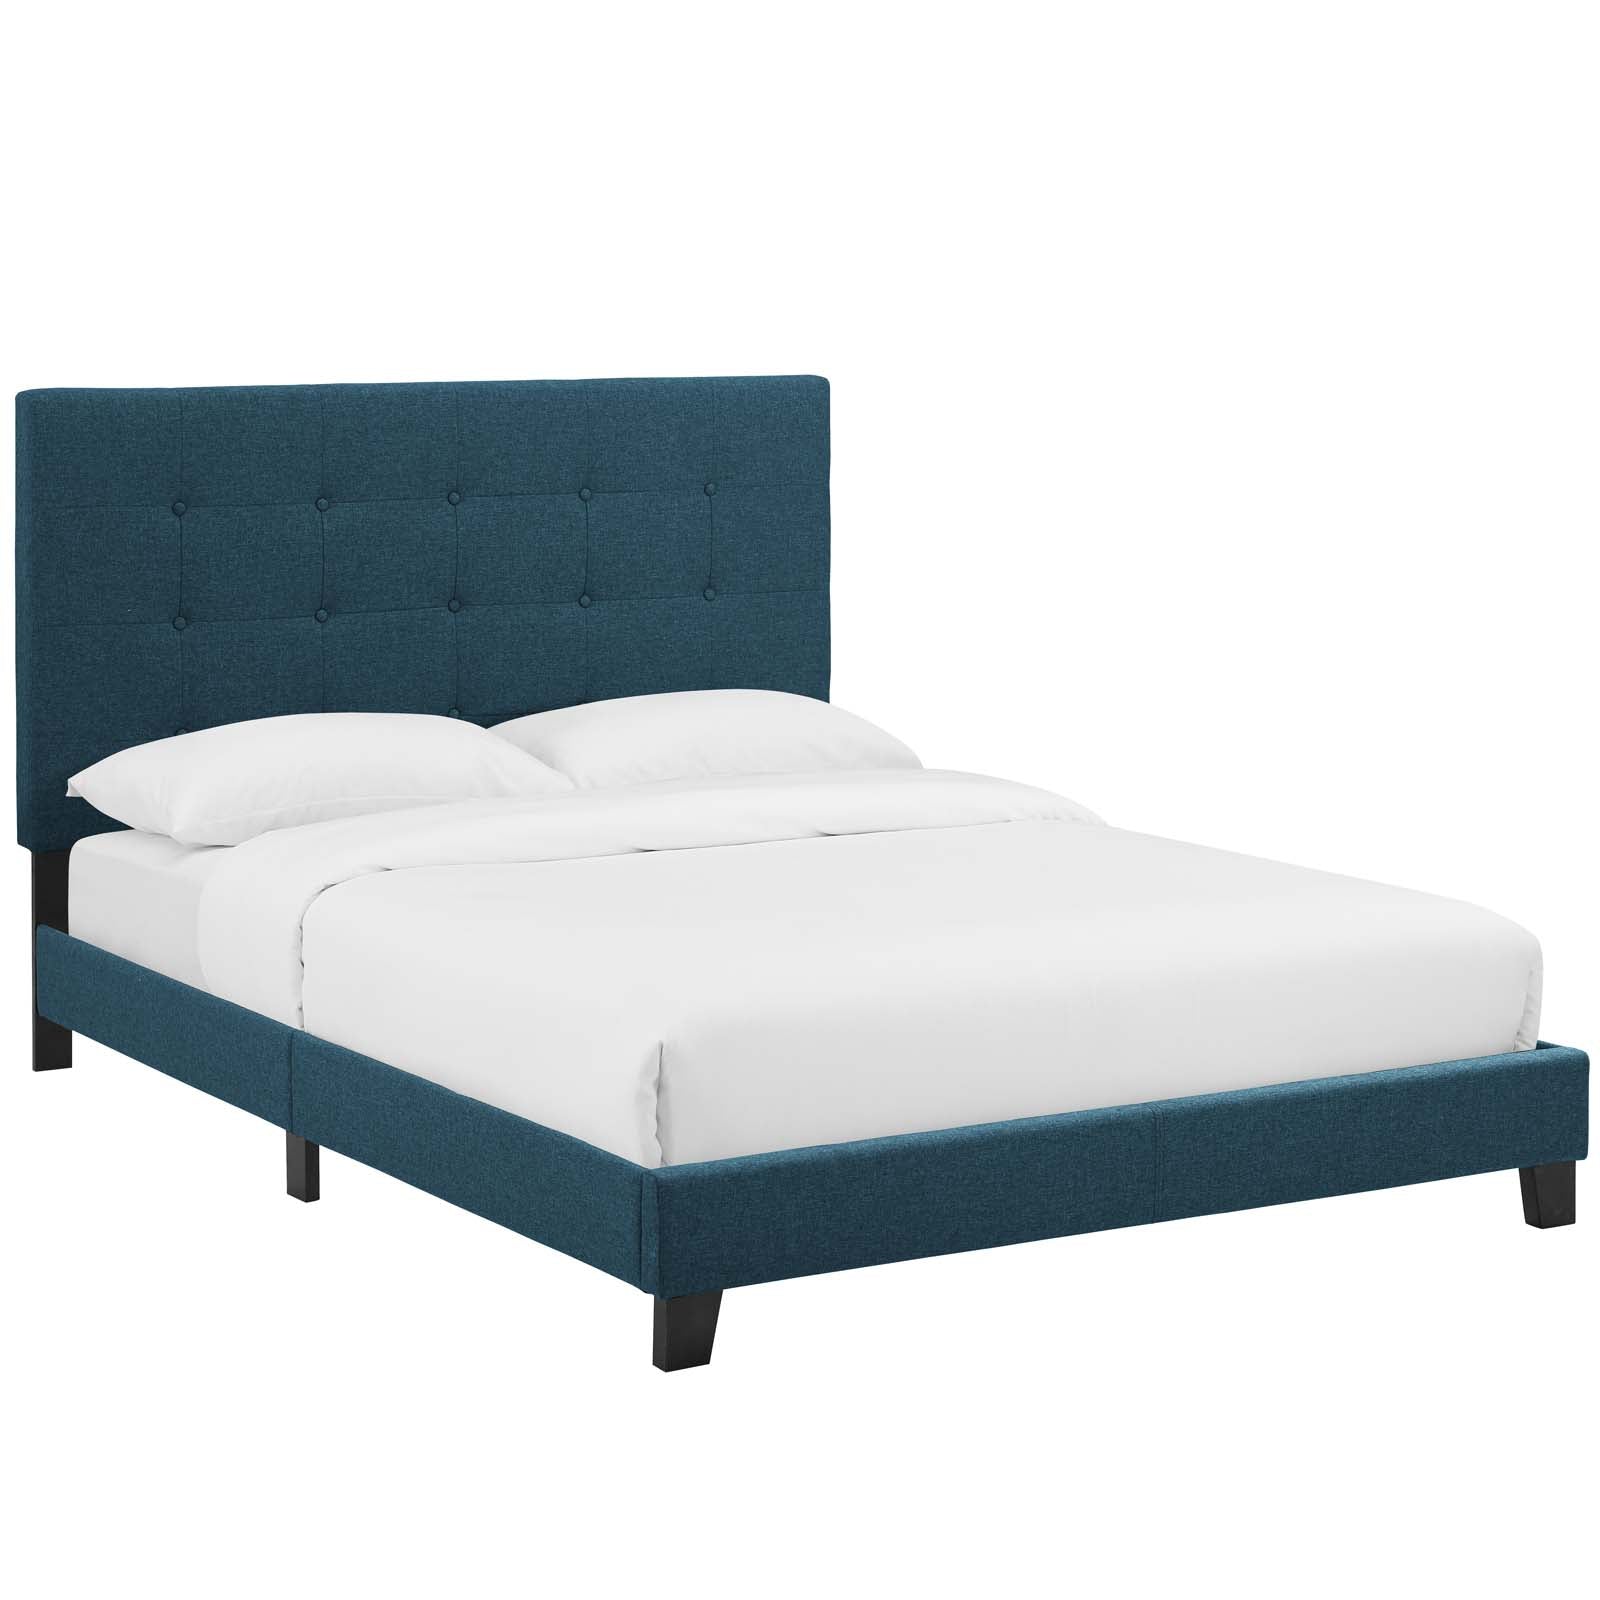 Melanie Queen Tufted Button Upholstered Fabric Platform Bed